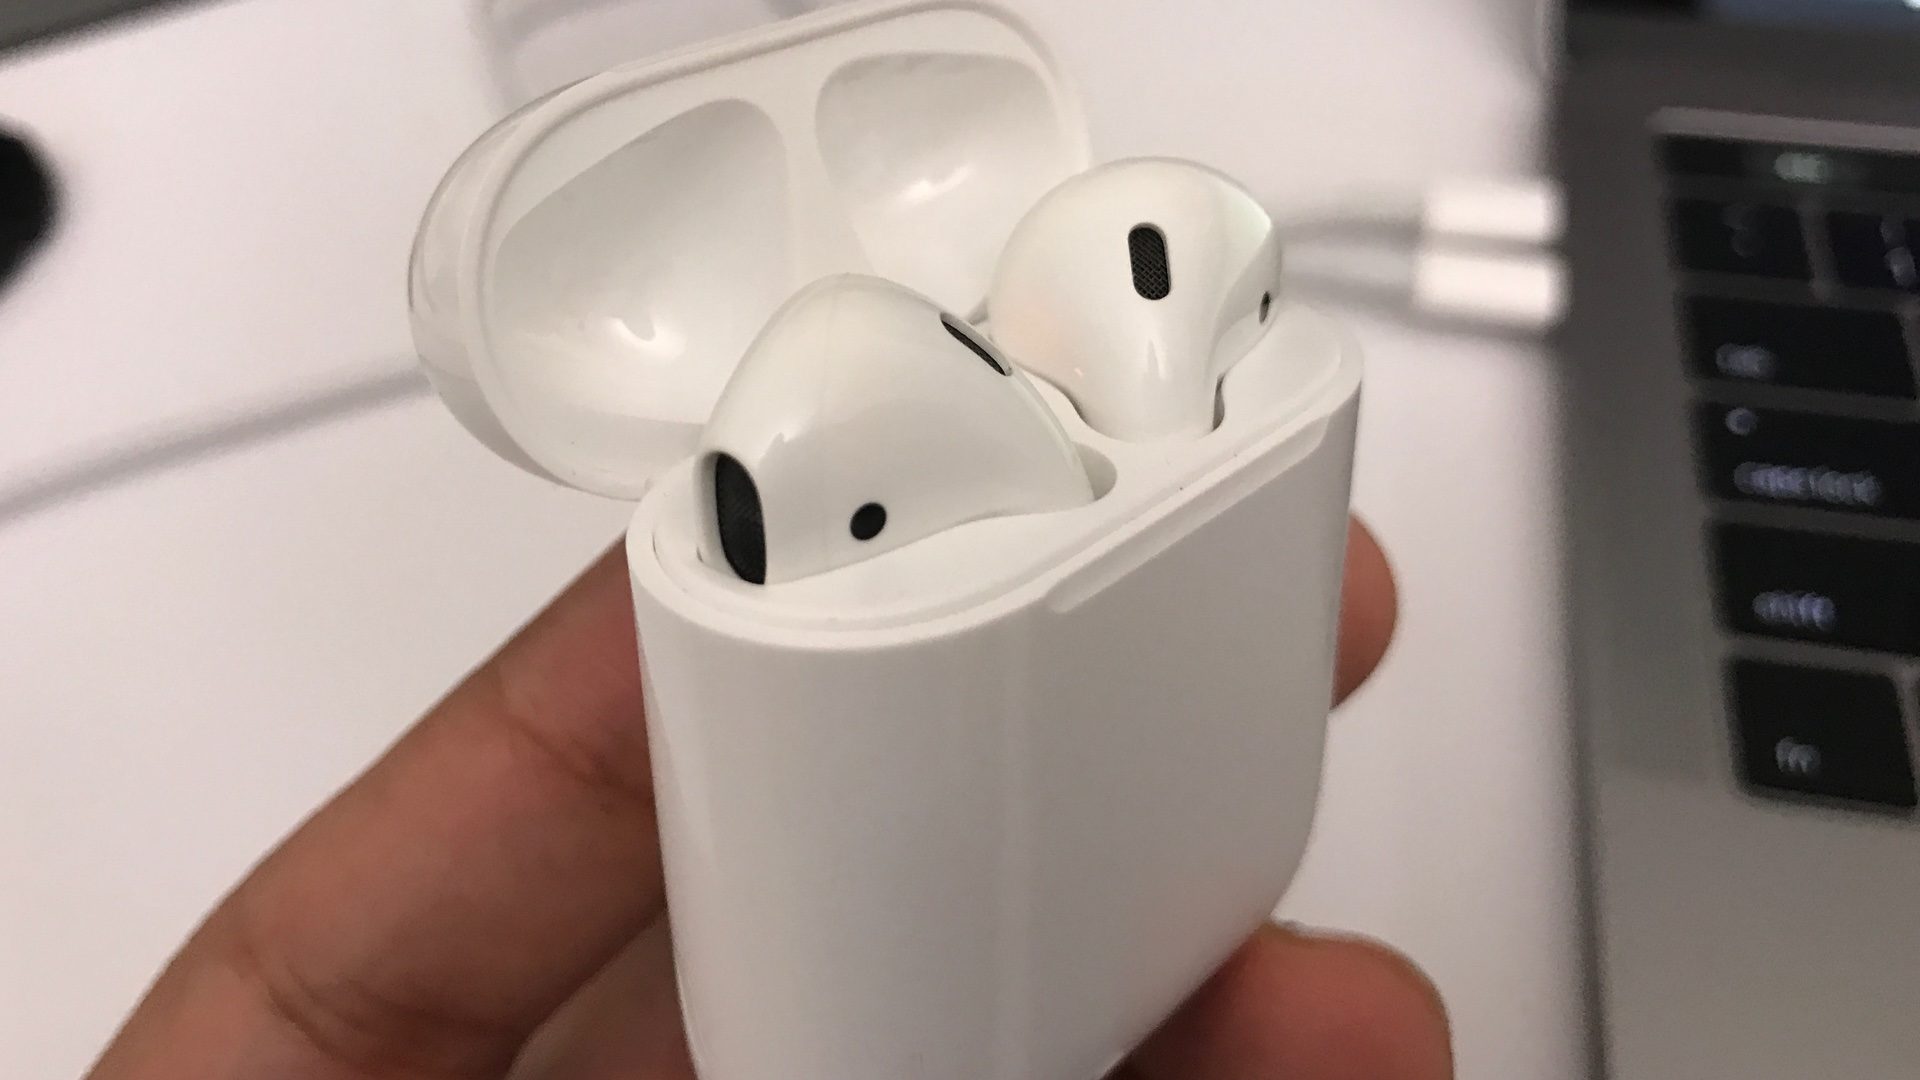 airpods-up-close-top-features.jpg?quality=82&strip=all